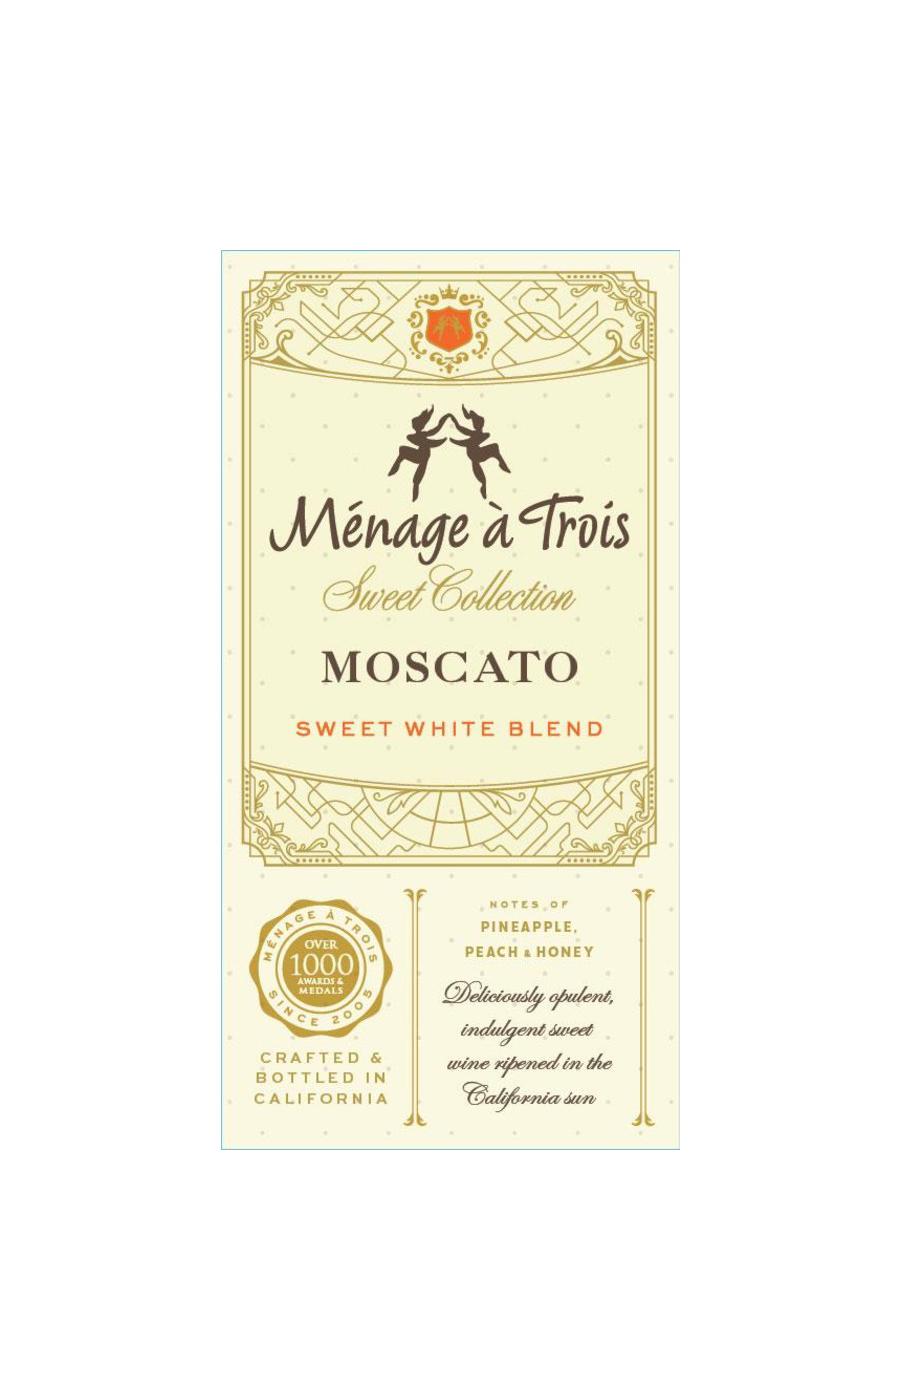 Ménage à Trois Moscato Sweet White Blend Wine; image 2 of 5